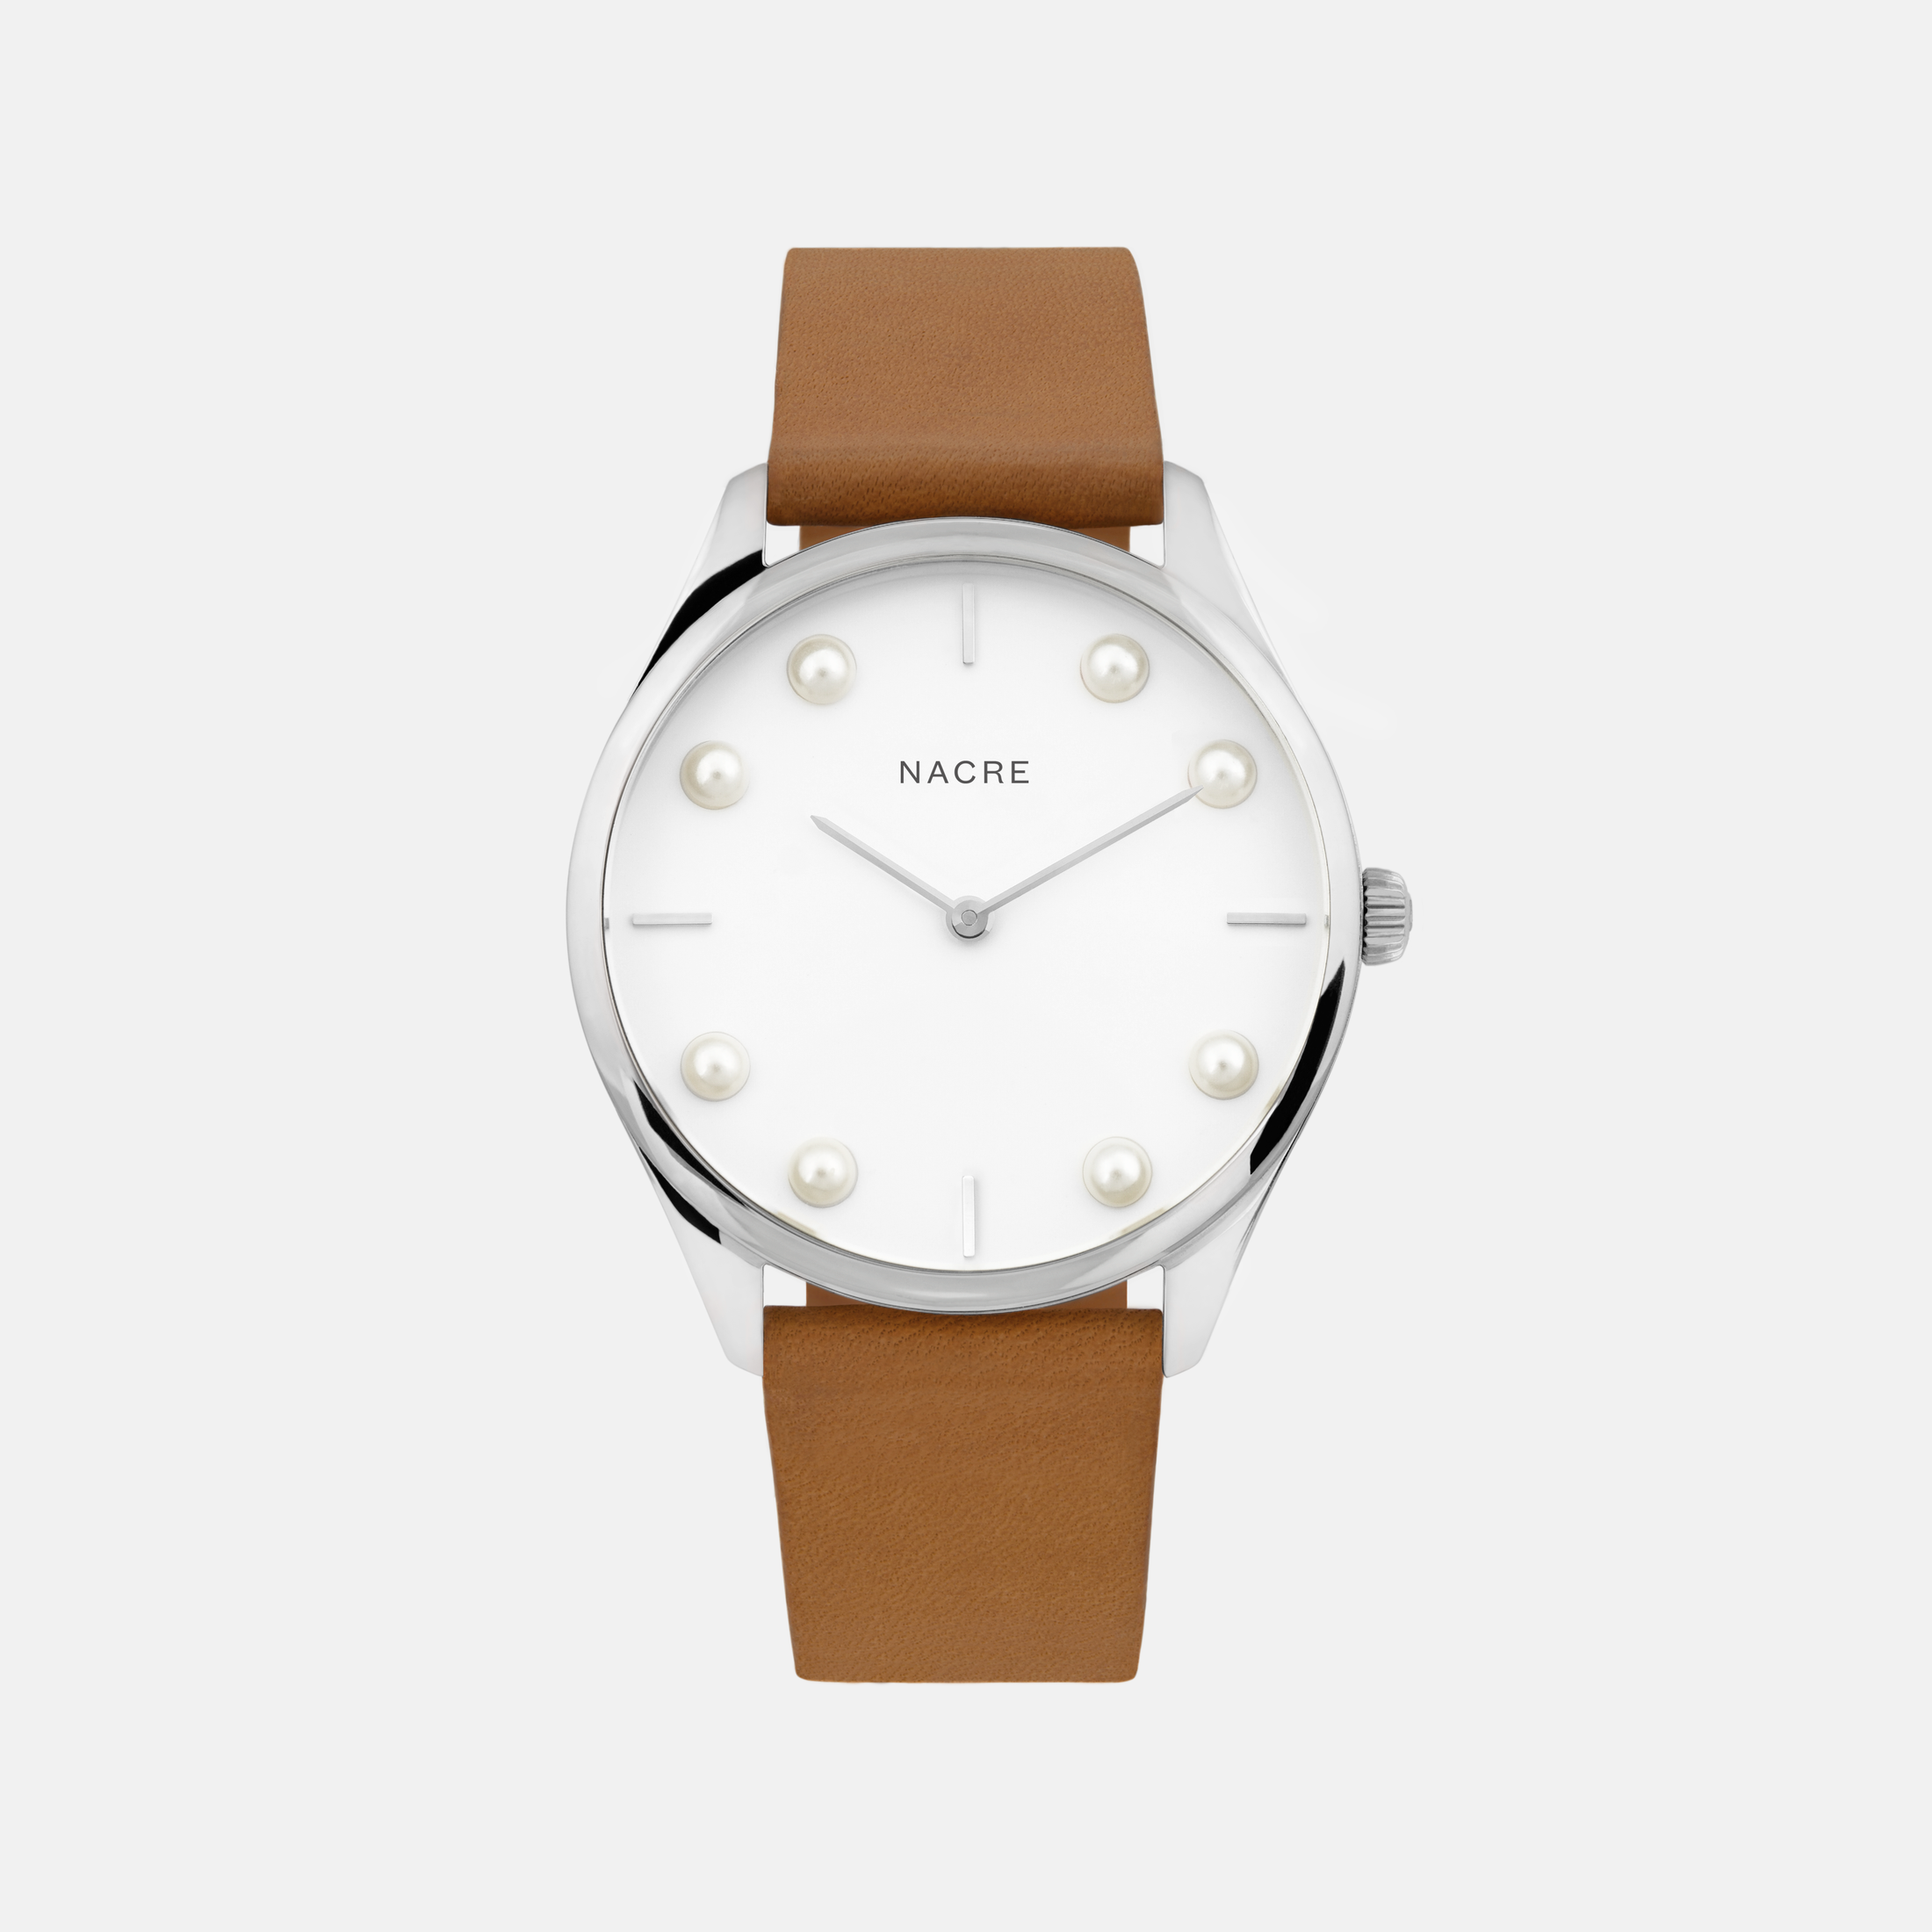 Lune 8 - Stainless Steel - Natural Leather